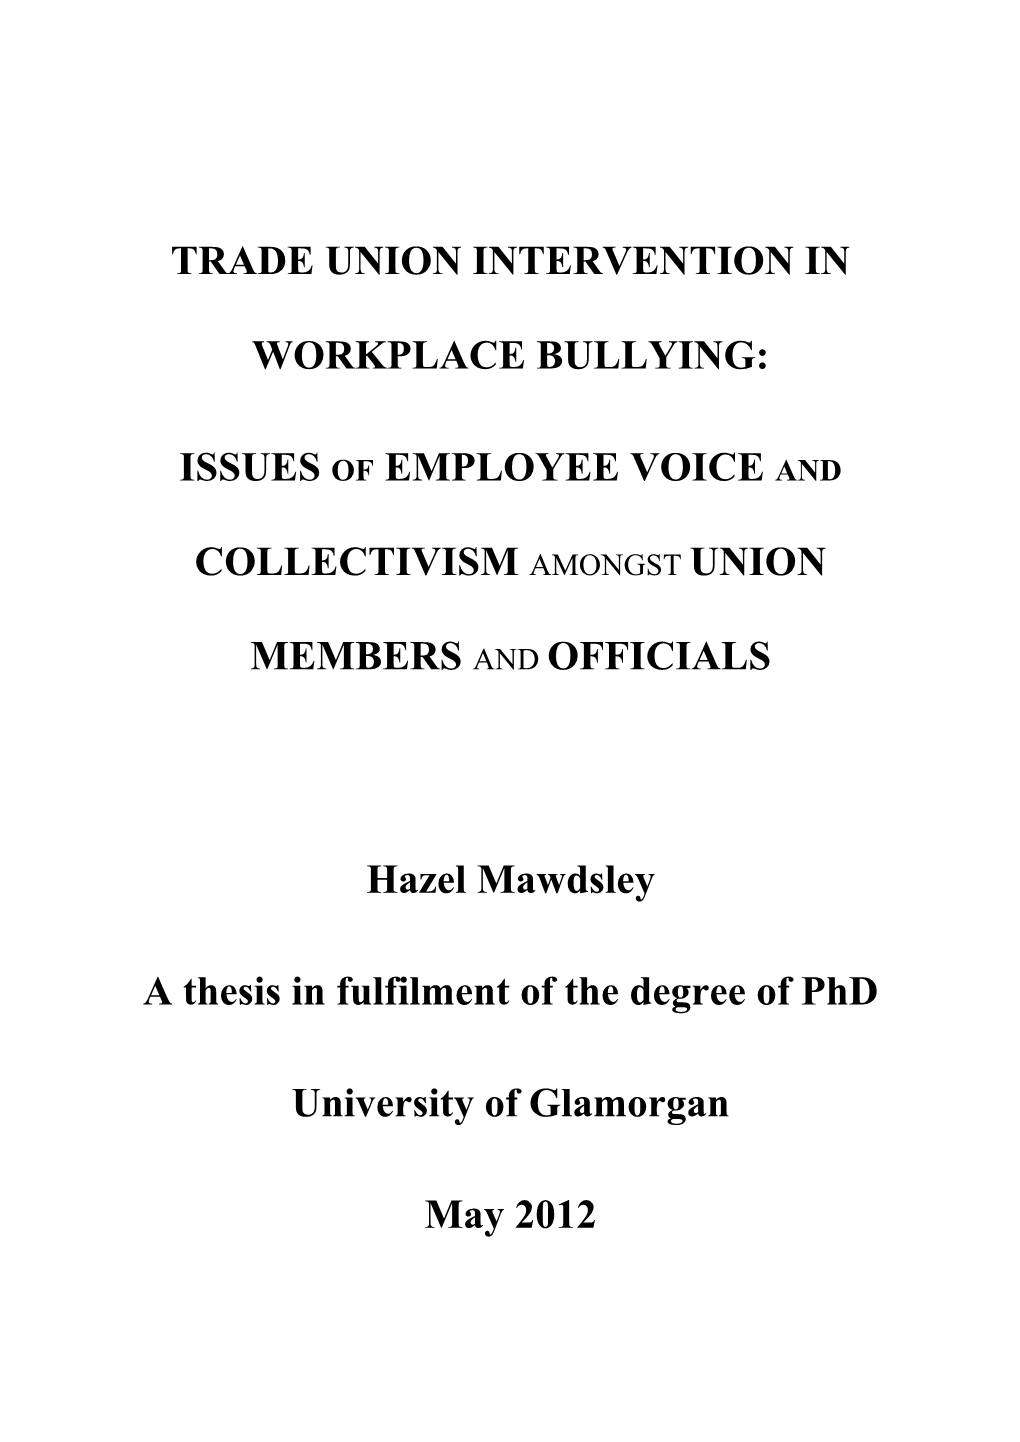 Trade Union Intervention in Workplace Bullying: Issues